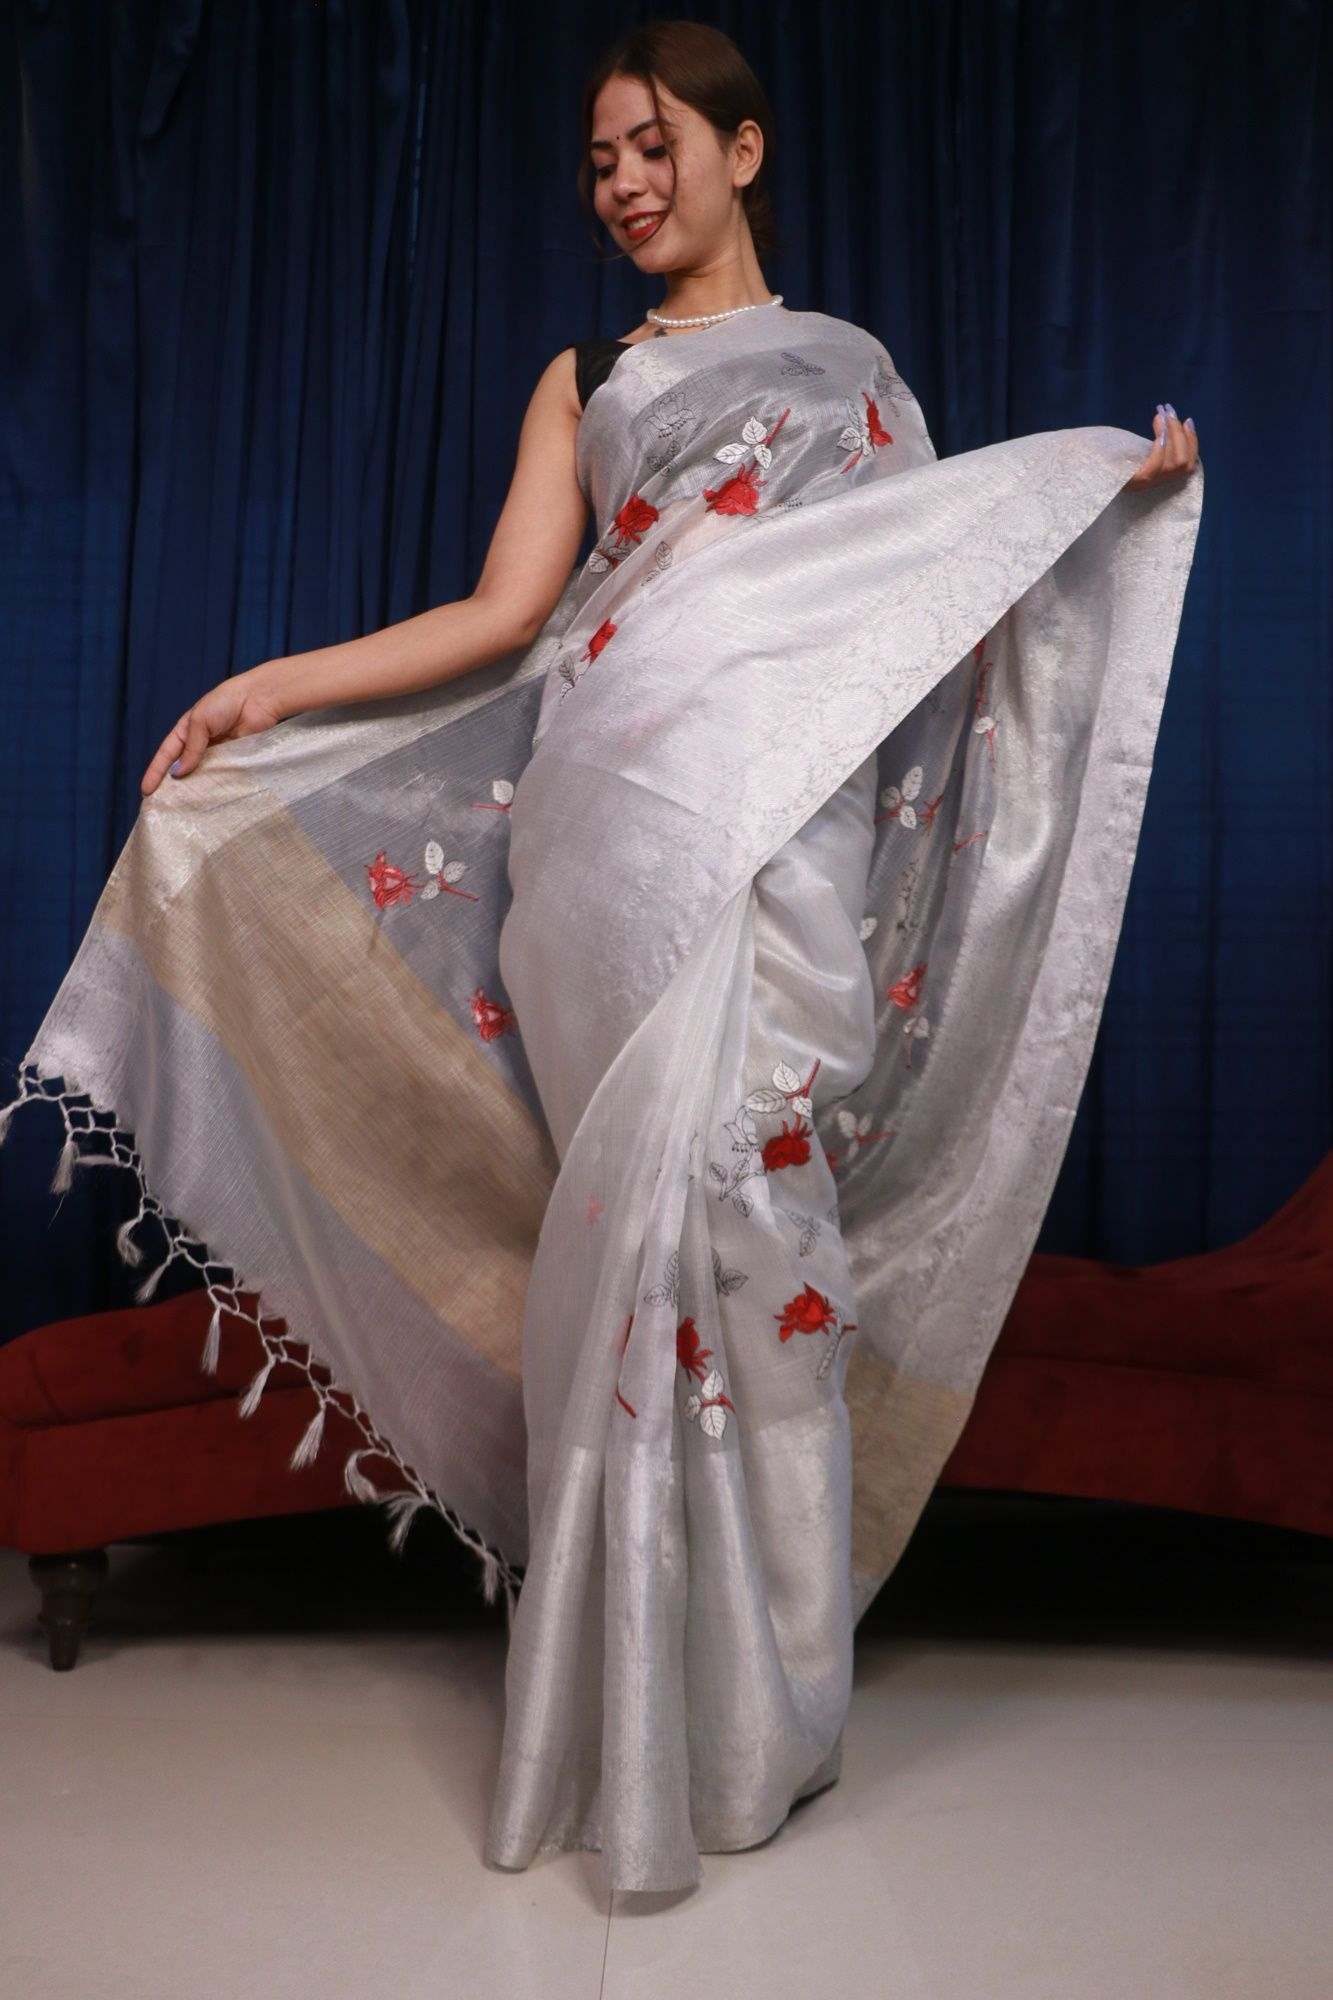 Silver Tissue Zari Woven With Red Floral buta embroided work all over Wrap in 1 minute saree - Isadora Life Online Shopping Store